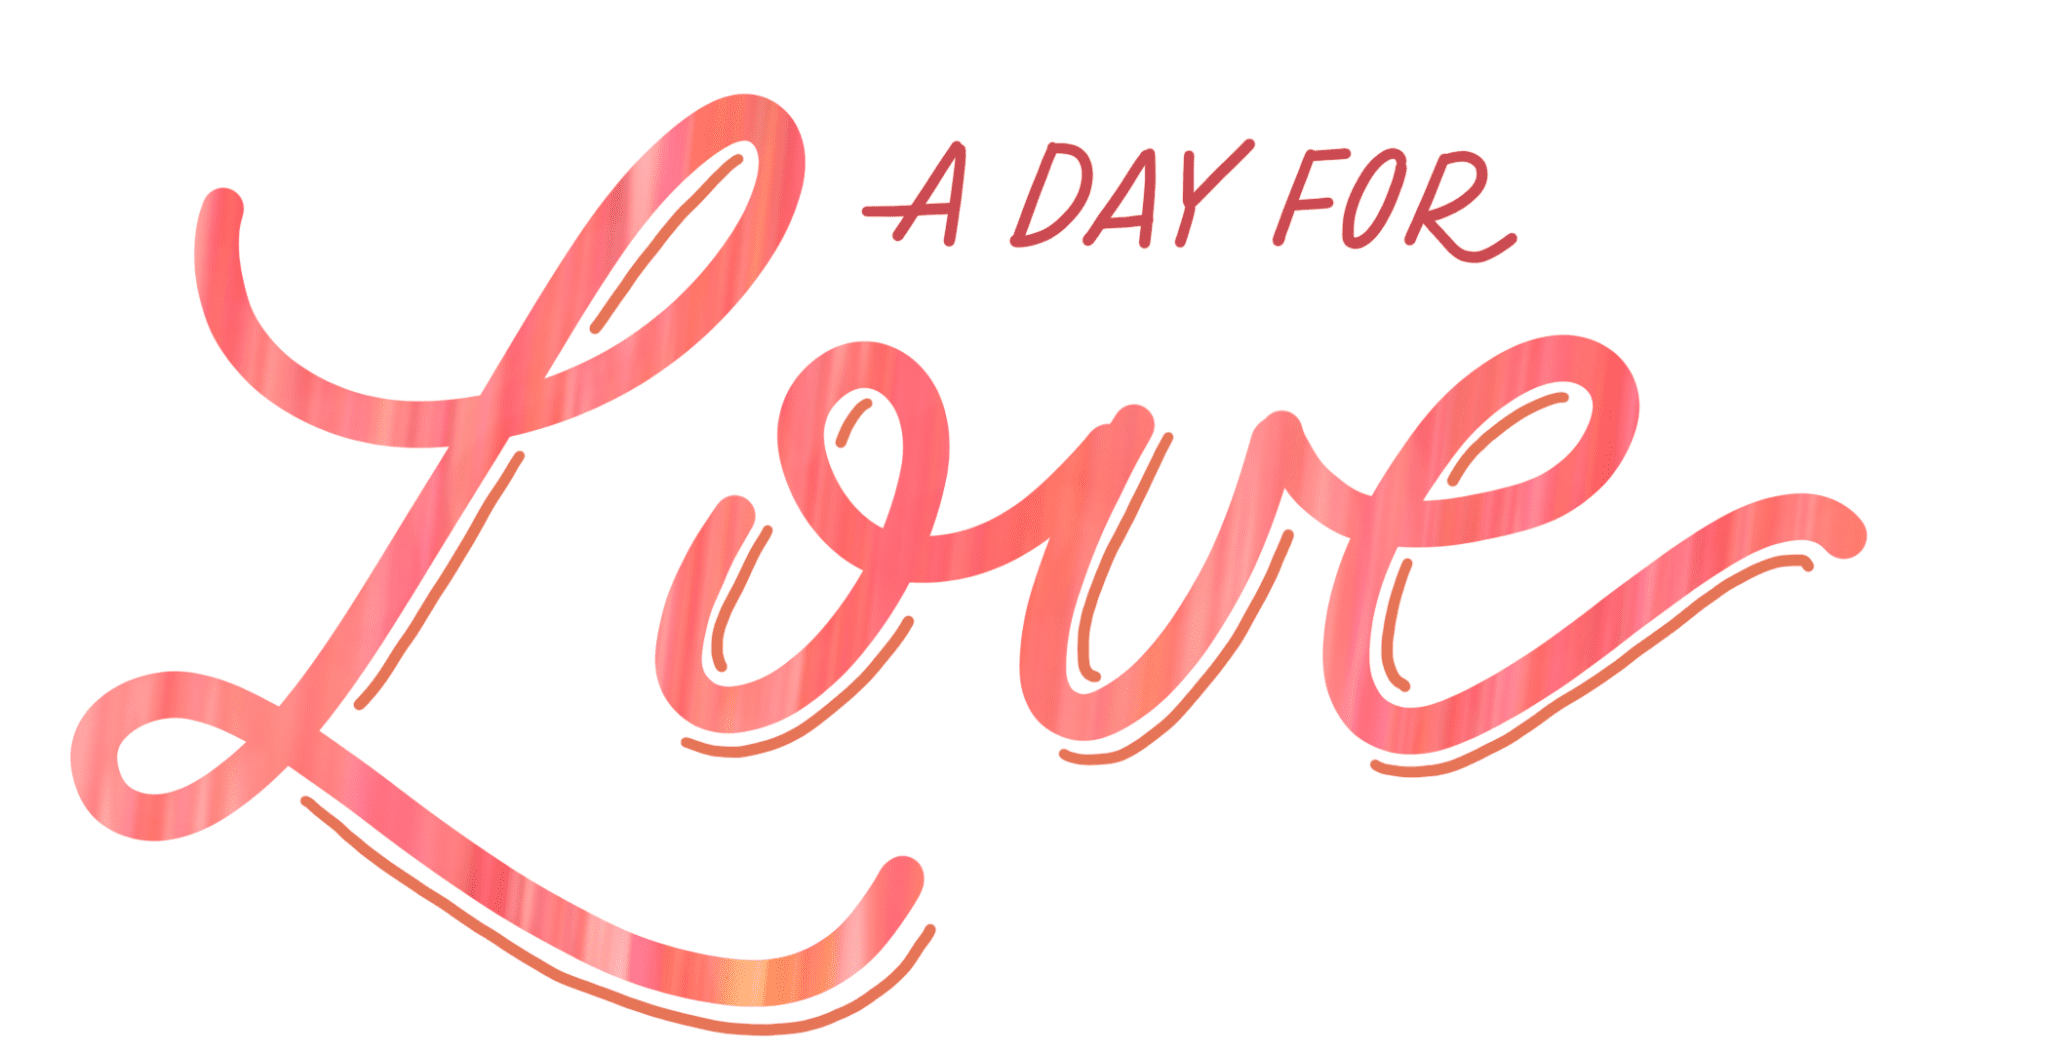 Handlettering reads "A Day for Love" in a colorful red script.